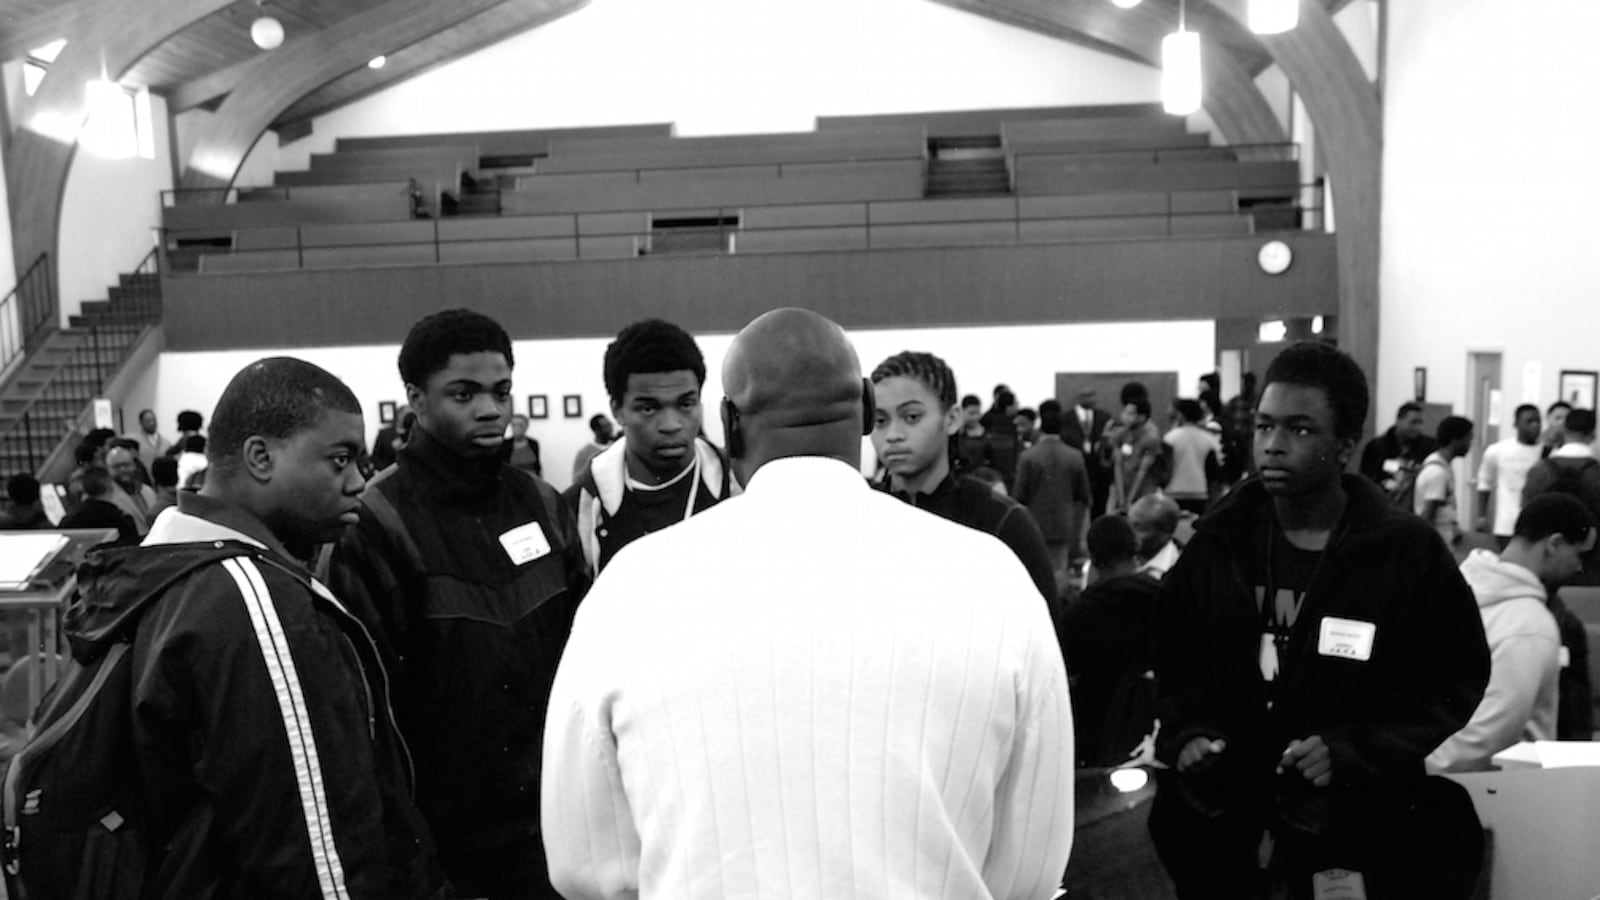 African-American male students from Hinkley High School met with business professionals and discussed race issues Friday at what is expected to be an annual summit for black males.